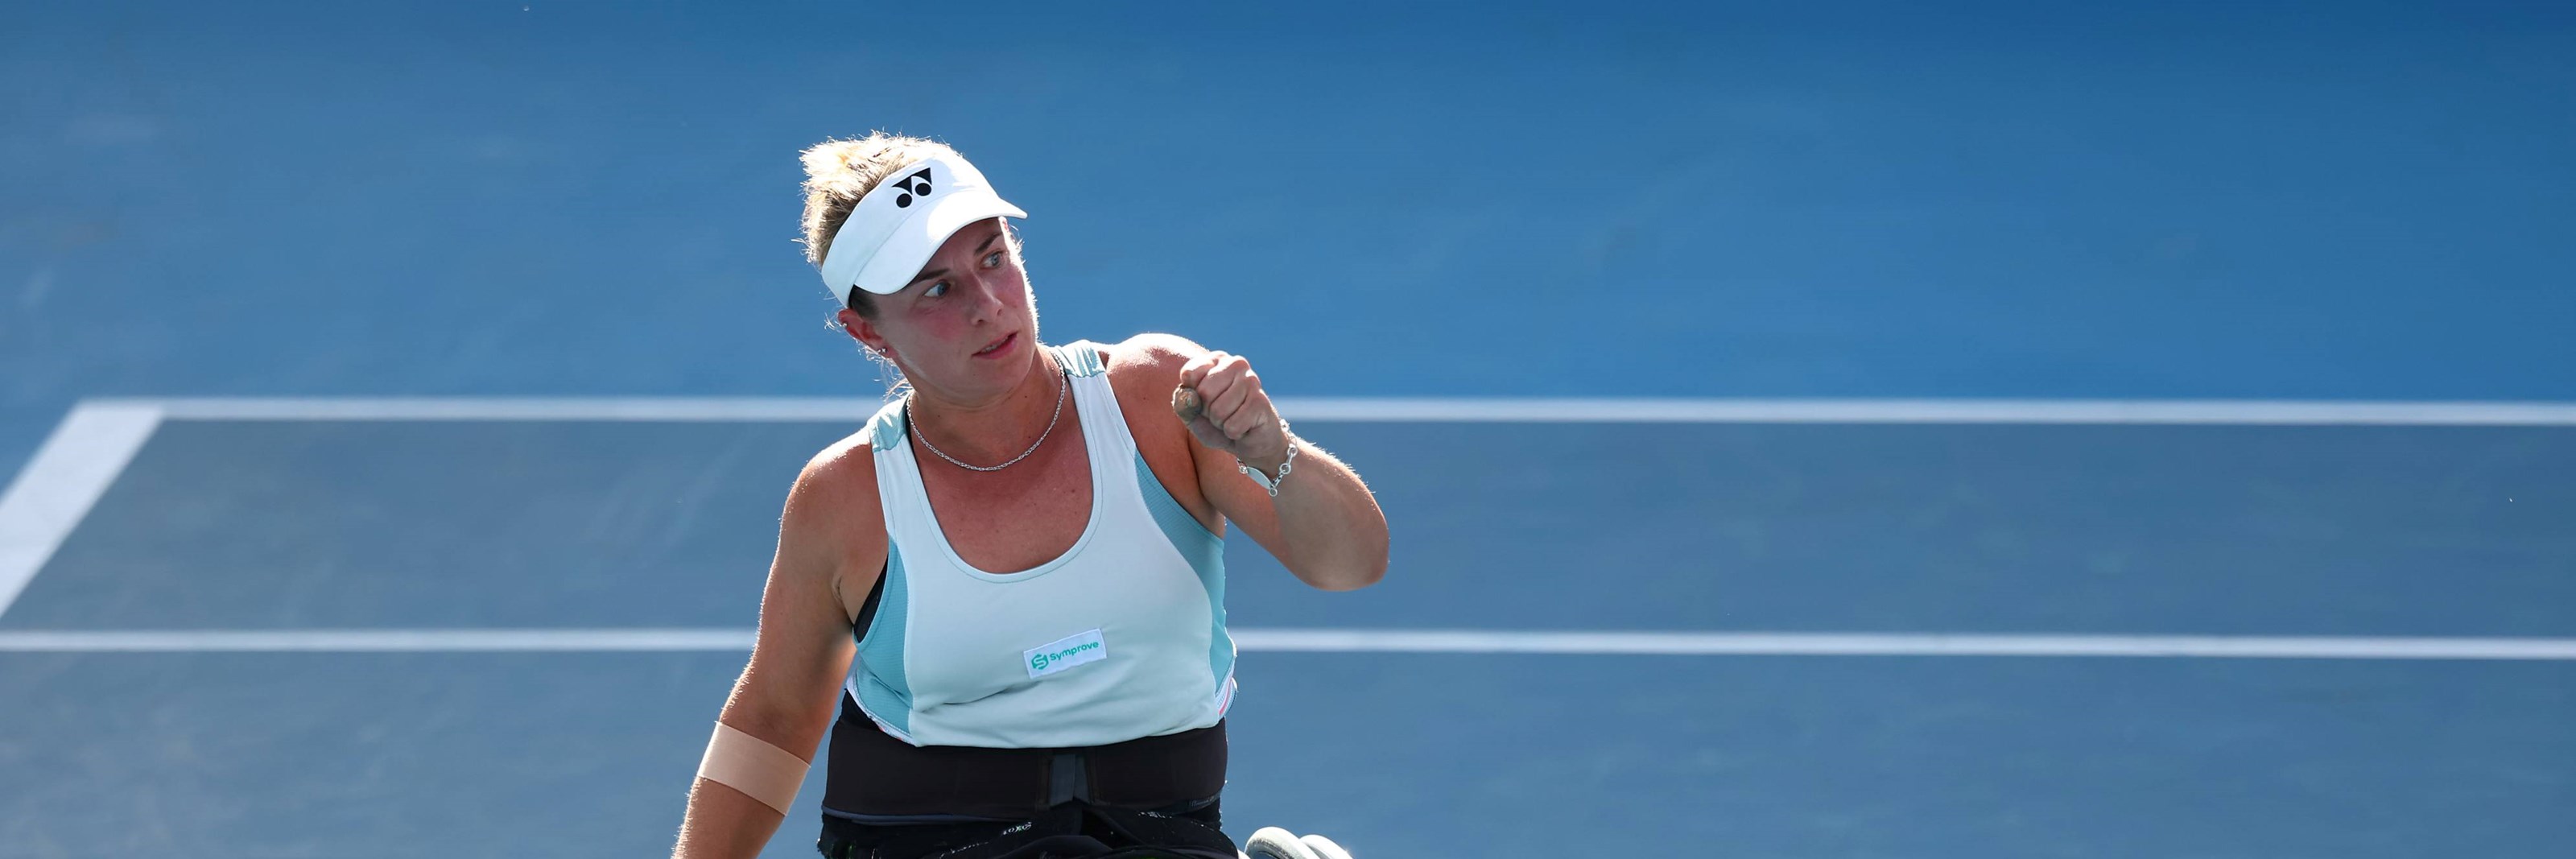 Wheelchair tennis star Lucy Shuker clenching her fist on court while holding her tennis racket